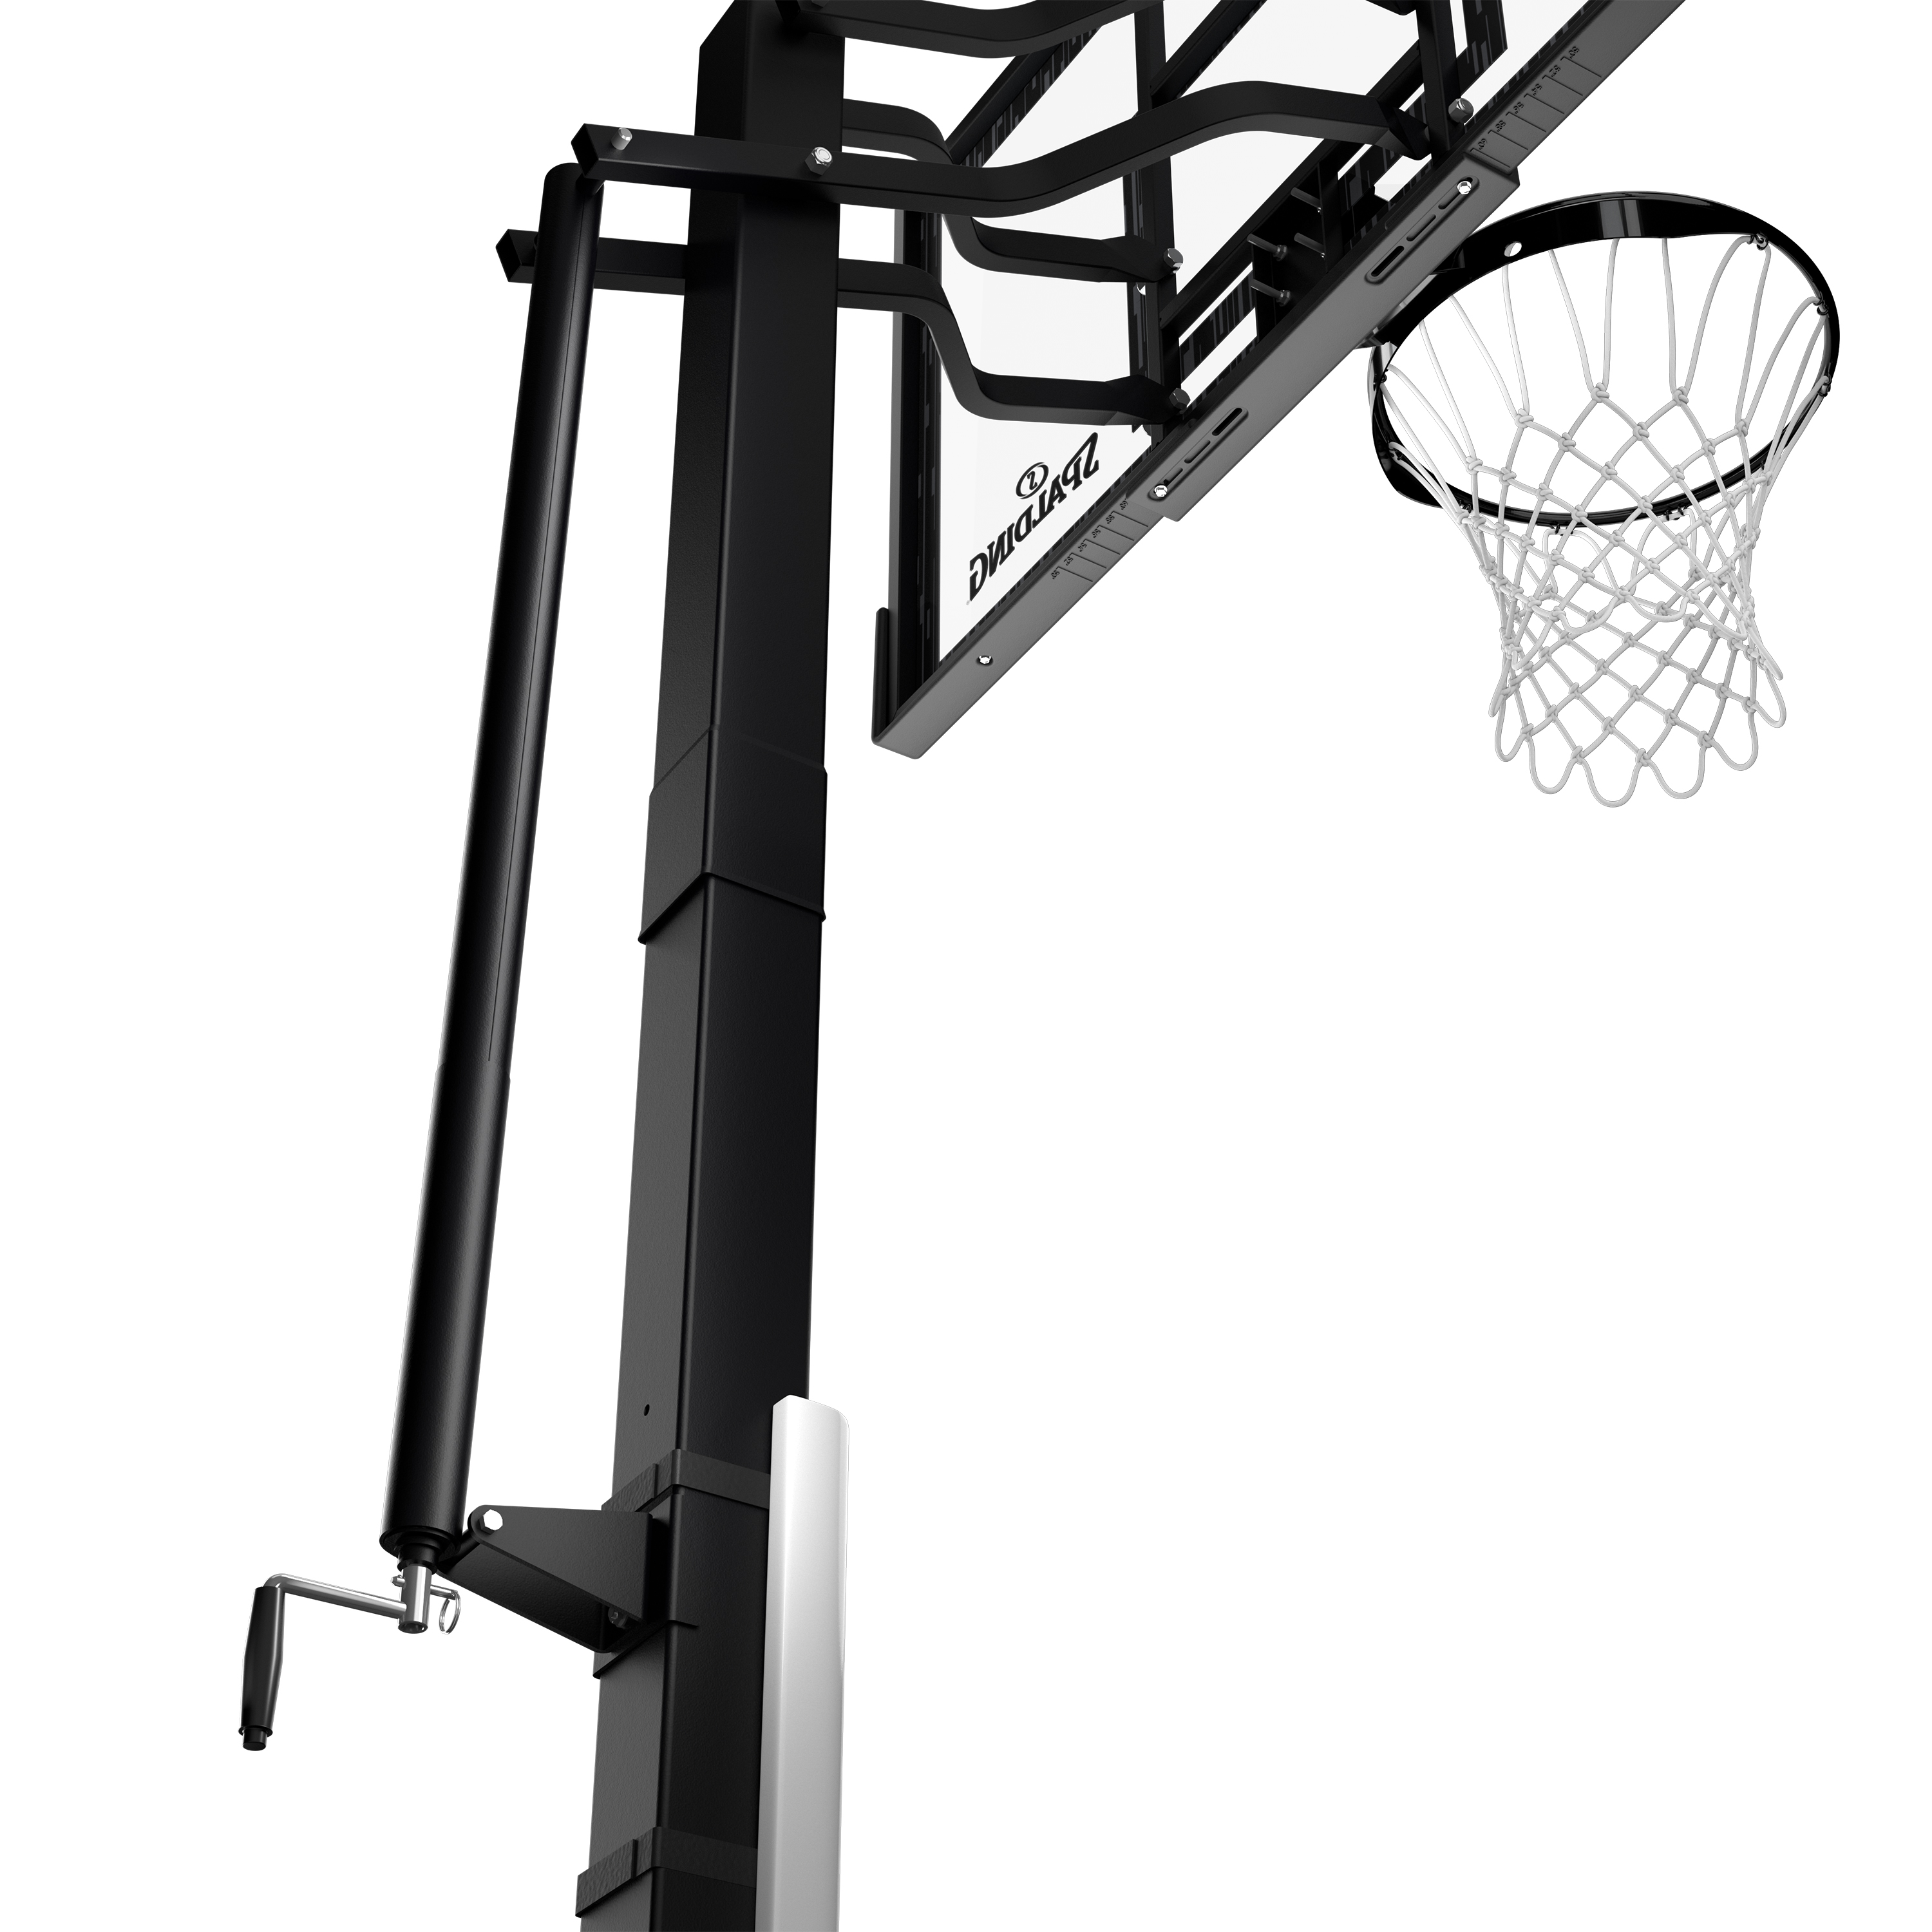 Spalding 60 inch Acrylic Screw Jack Portable Basketball Hoop System - image 4 of 11